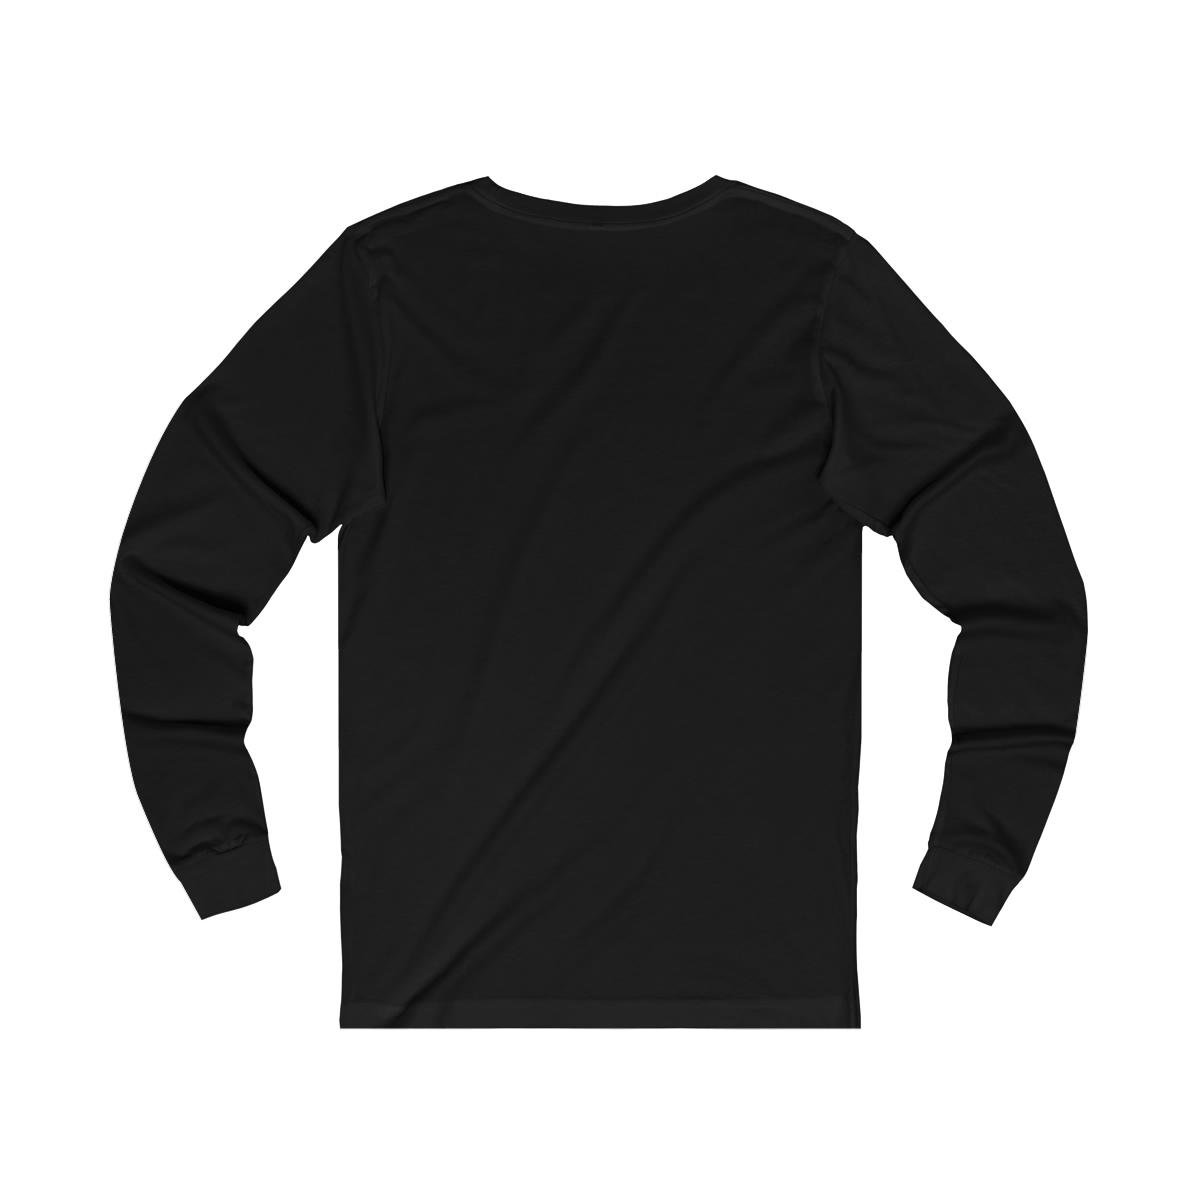 Searching Serenity – Unleashed the Beast Long Sleeve Tshirt